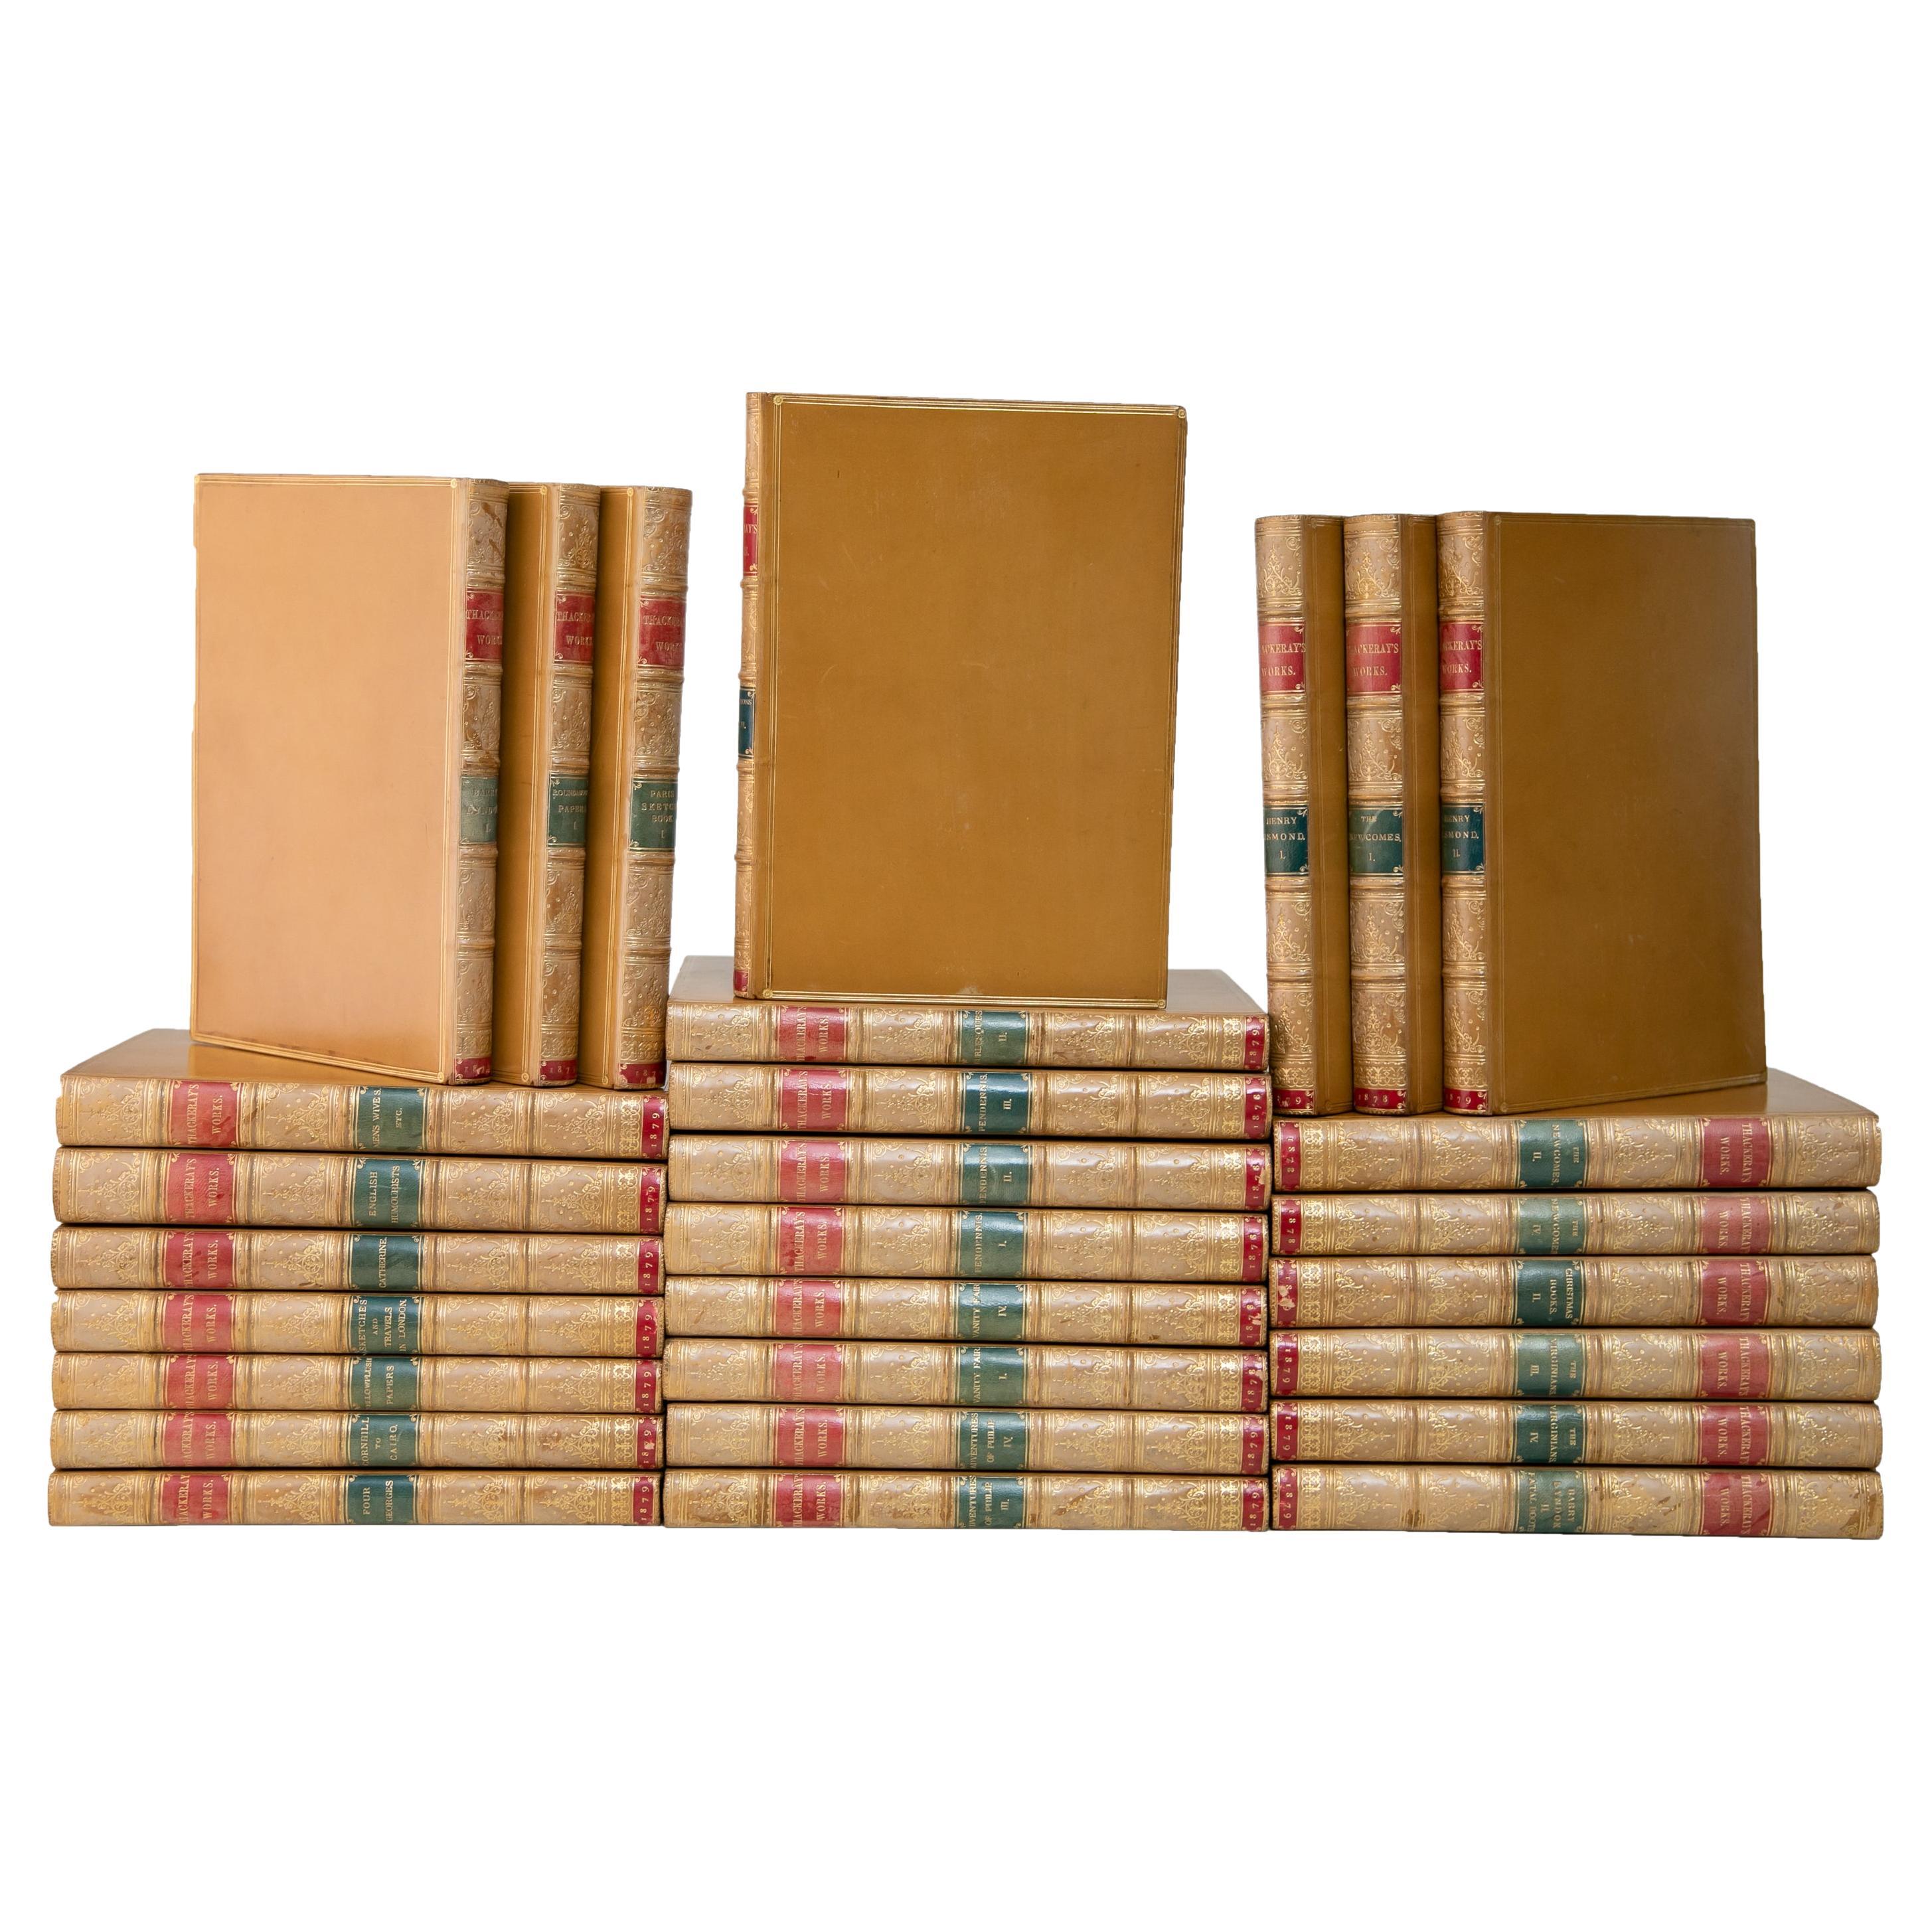 52 volumes. William Makepeace Thackeray, Les œuvres.